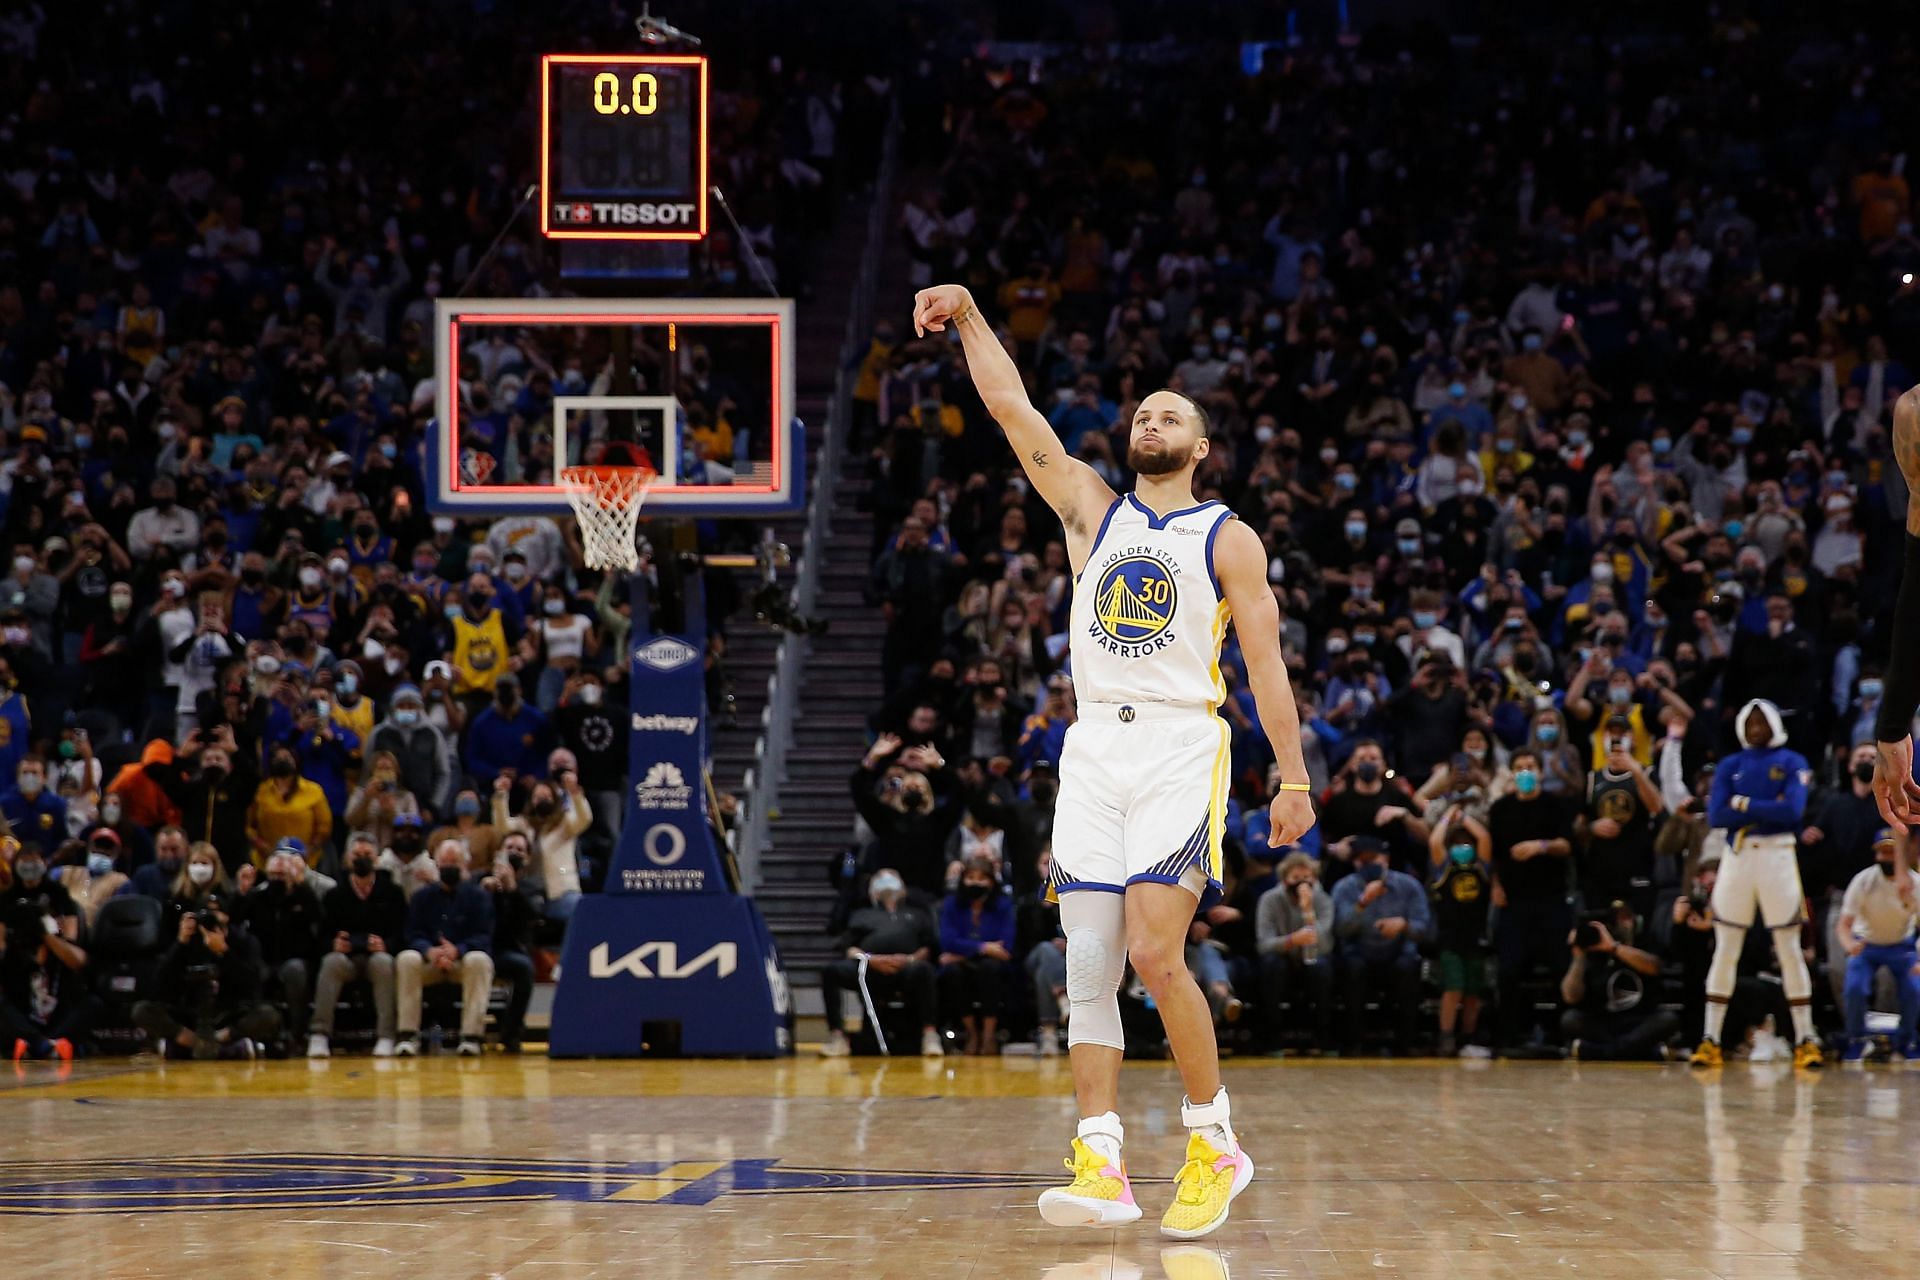 Watch: Steph Curry seen adjusting his shooting mechanics as he tries to